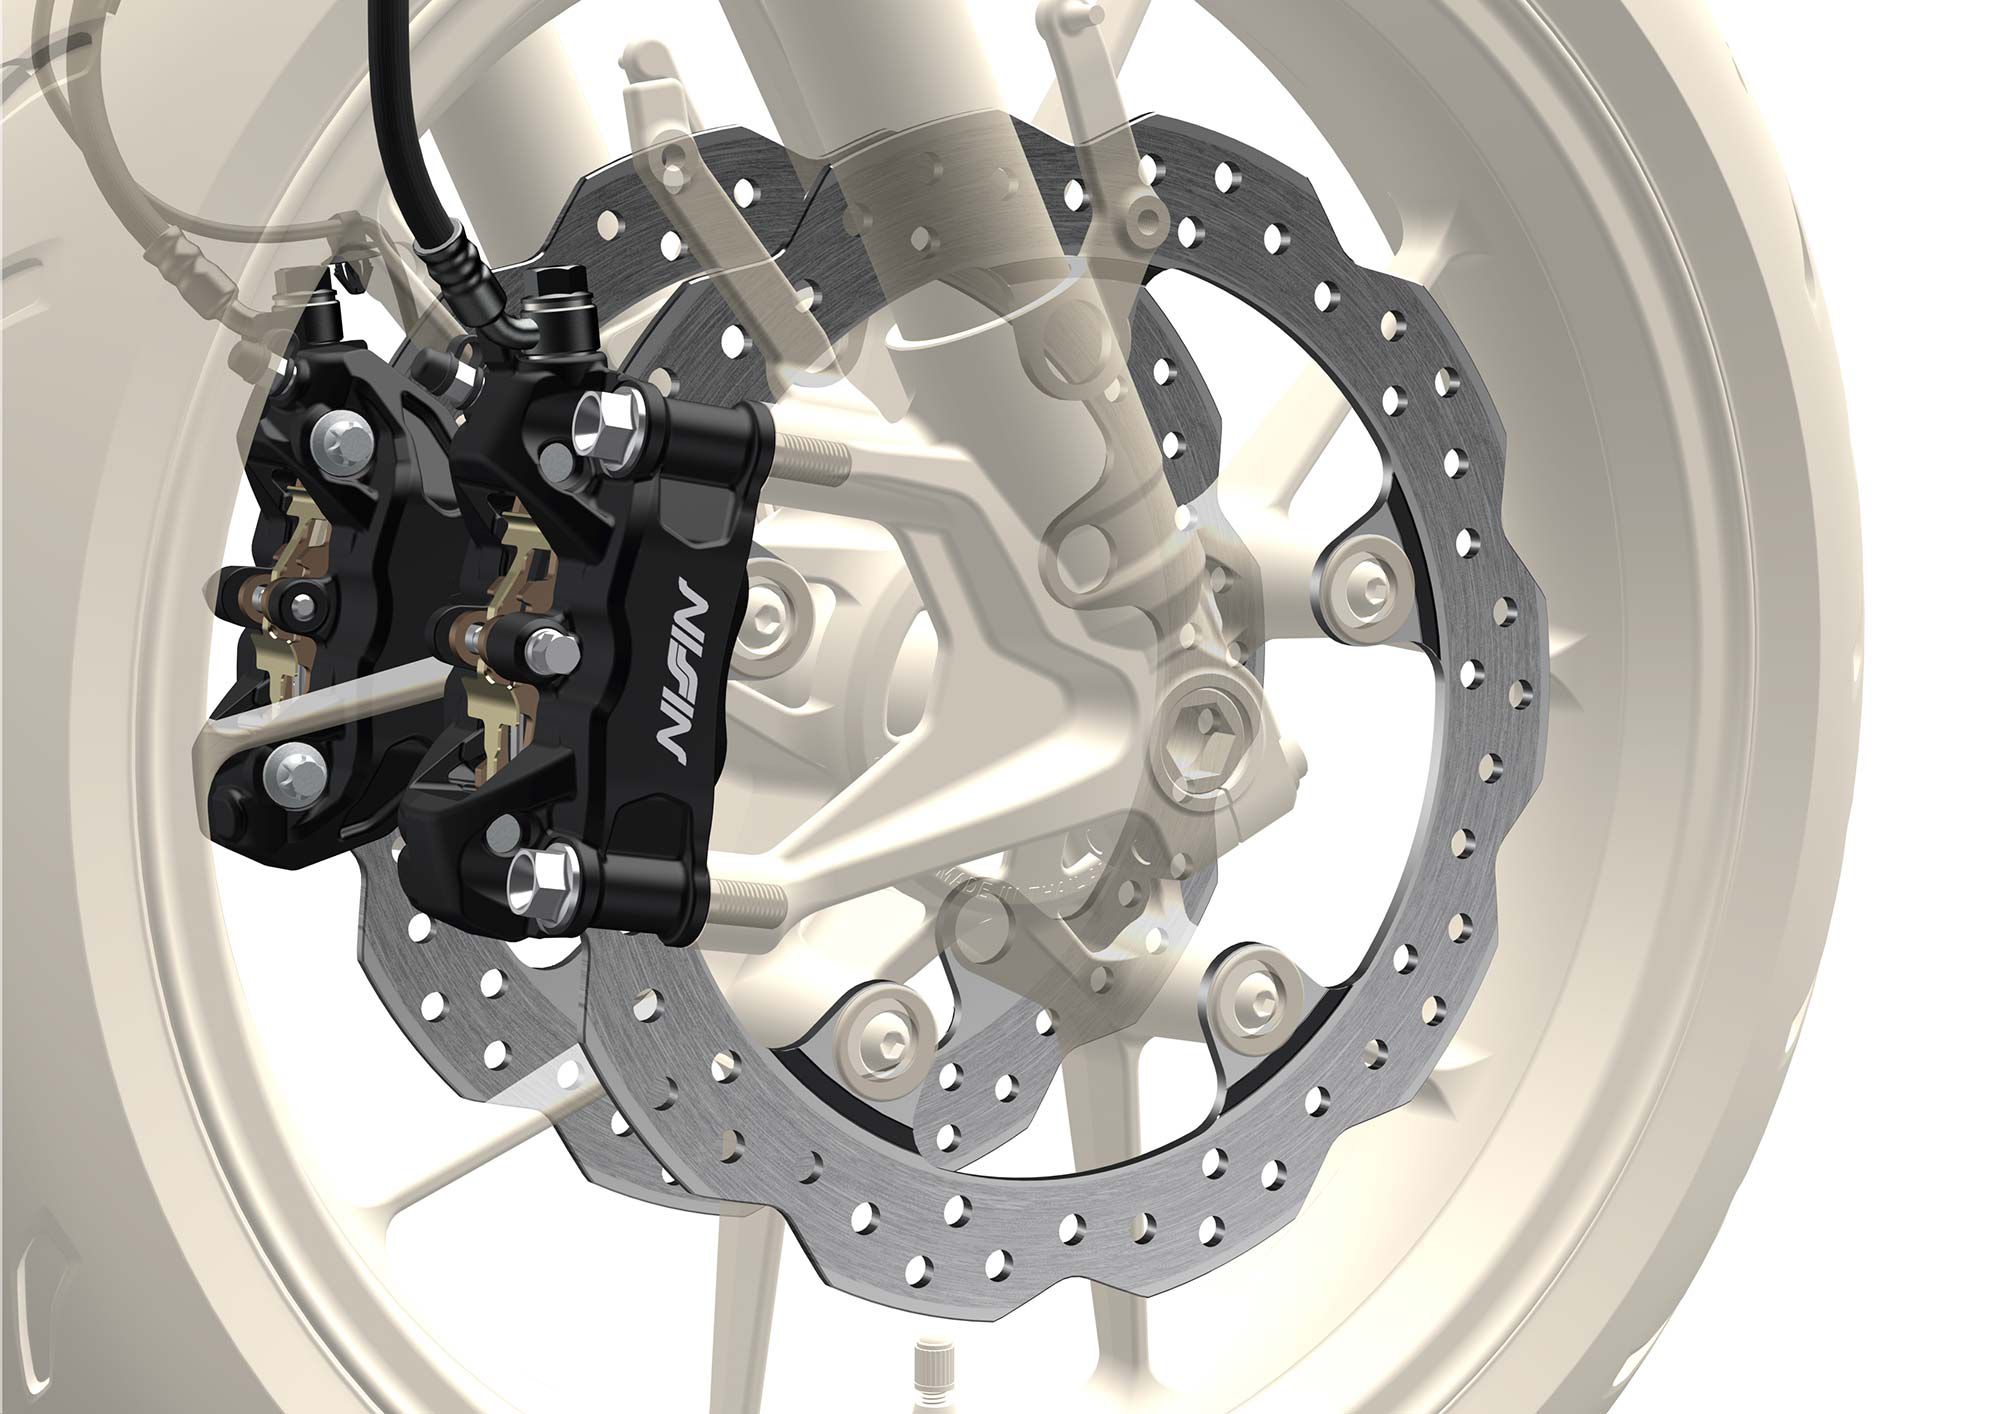 Dual 296mm front brake discs with radial-mount four-piston calipers increase stopping power for 2022.